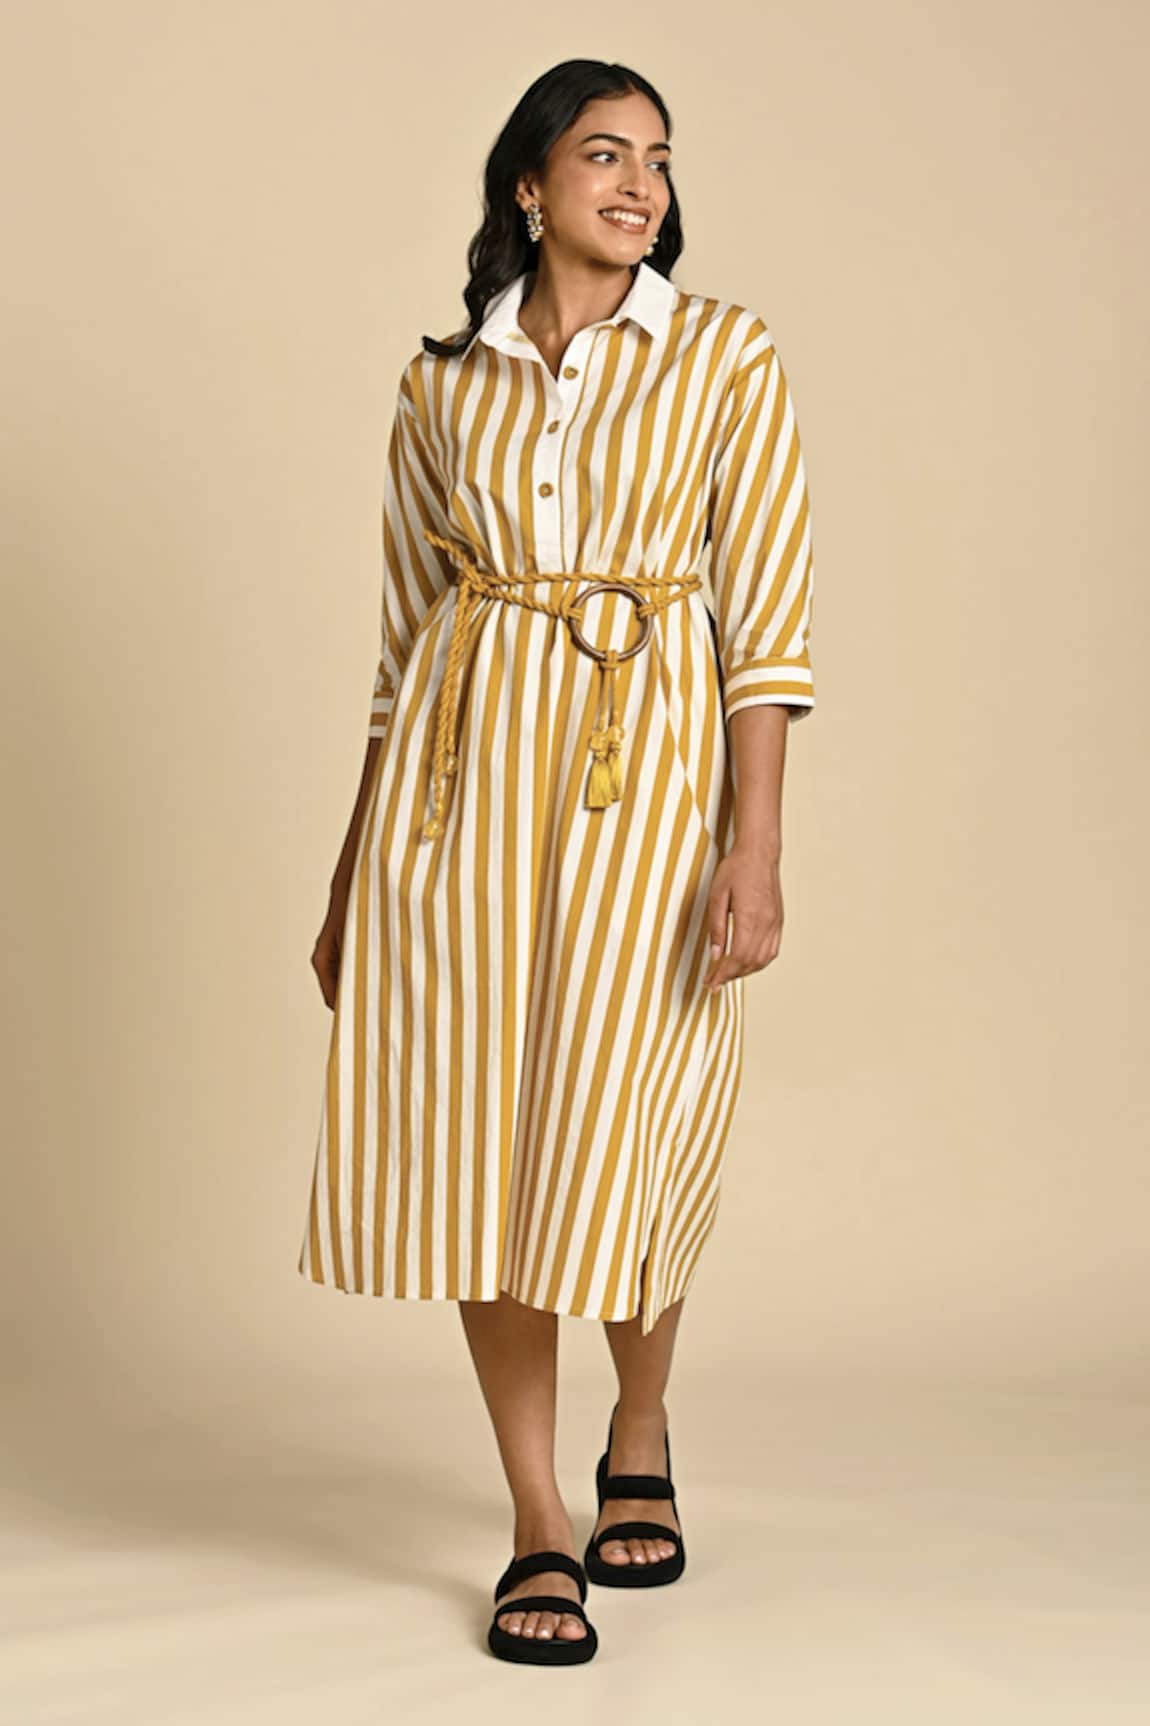 Kanelle Wiona Striped Print Collared Dress With Belt